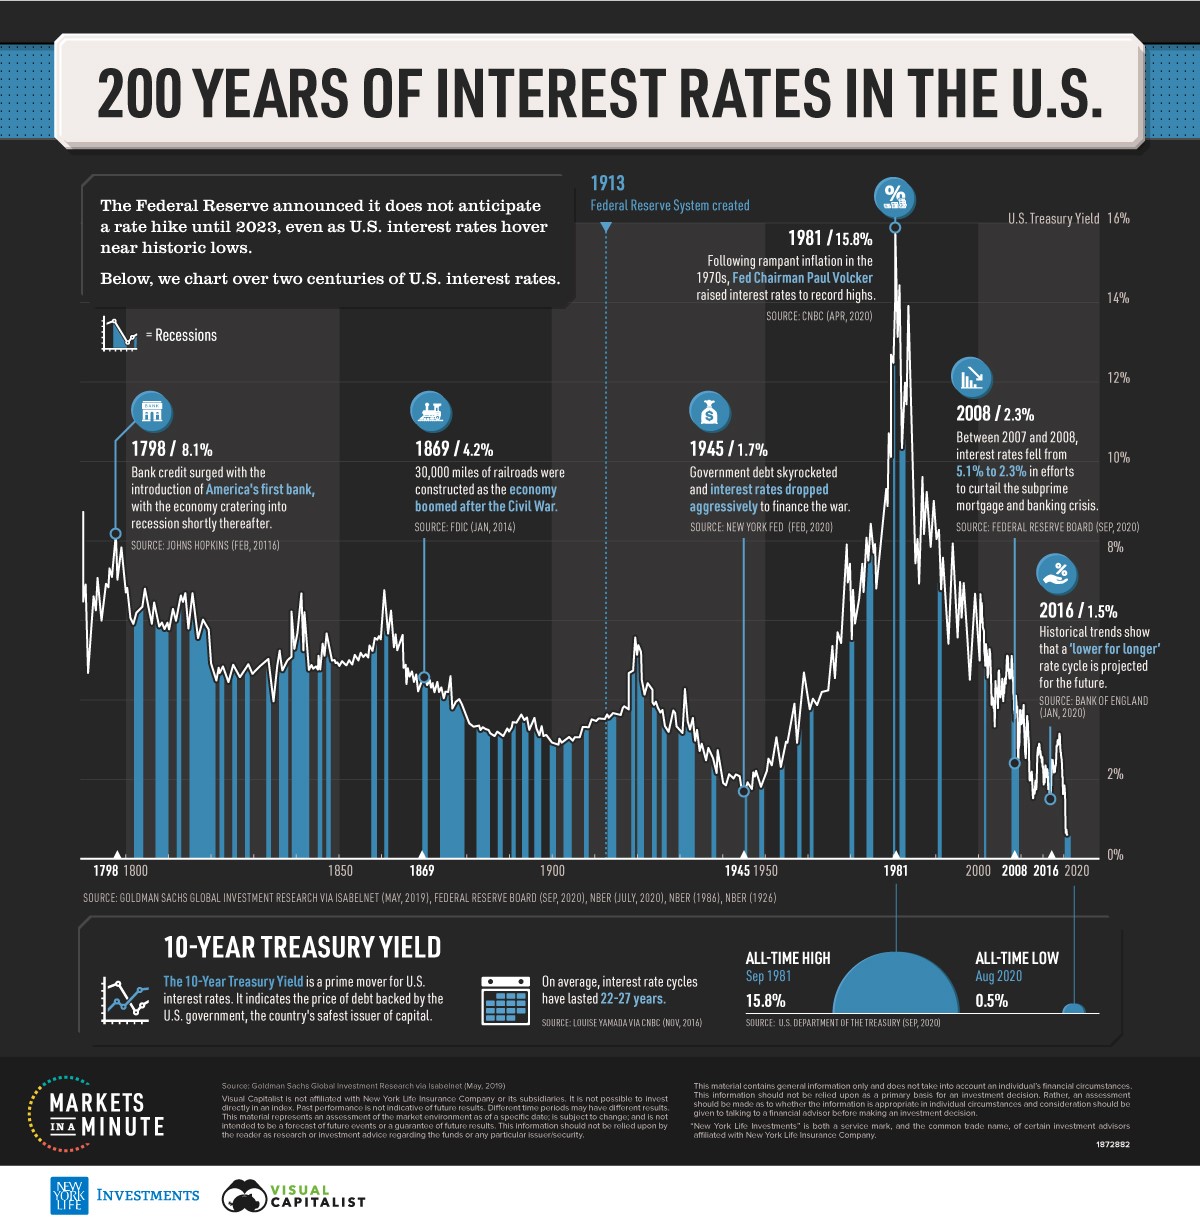 What Interest Rate Triggers The Next Crisis? | Investing.com